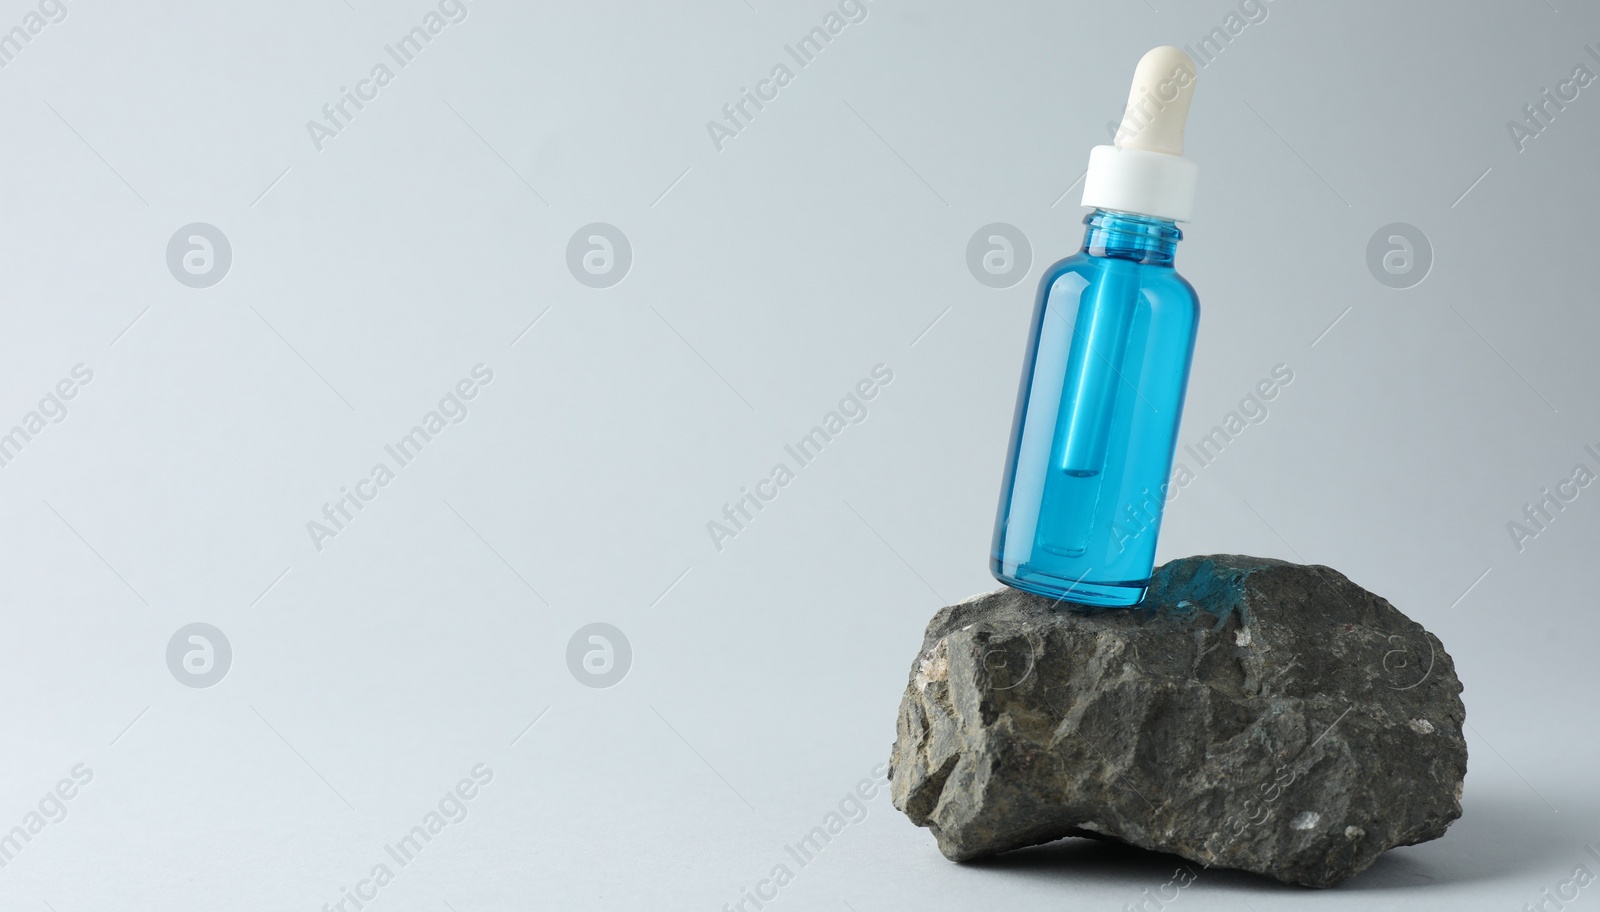 Photo of Bottle of cosmetic serum on stone against light grey background, space for text